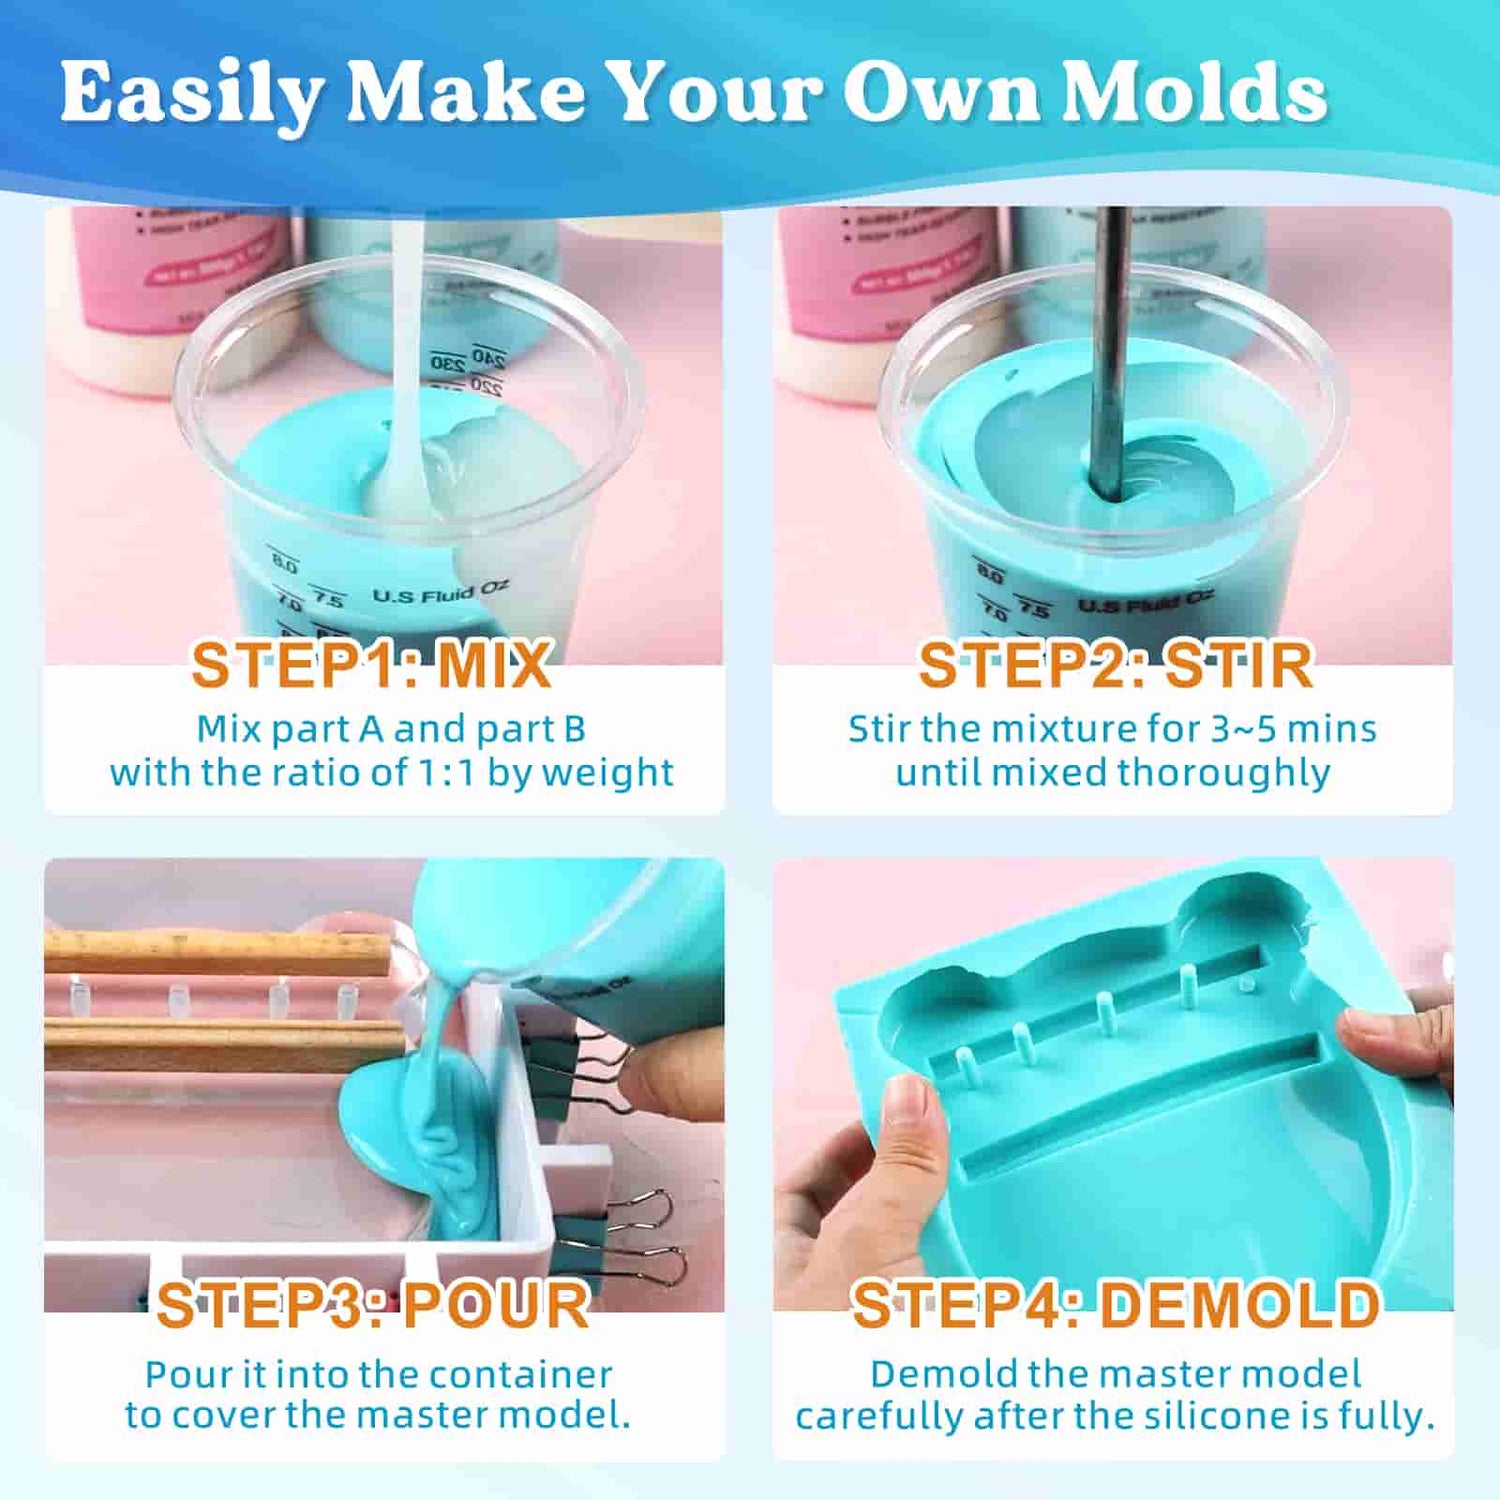 Silicone Mold Making Kit - 2.2 Gallon Liquid Silicone Rubber 15A with  Adjustable Mold Housing - Fast Cured Easy 1:1 Mixing Ratio Silicone Casting  for